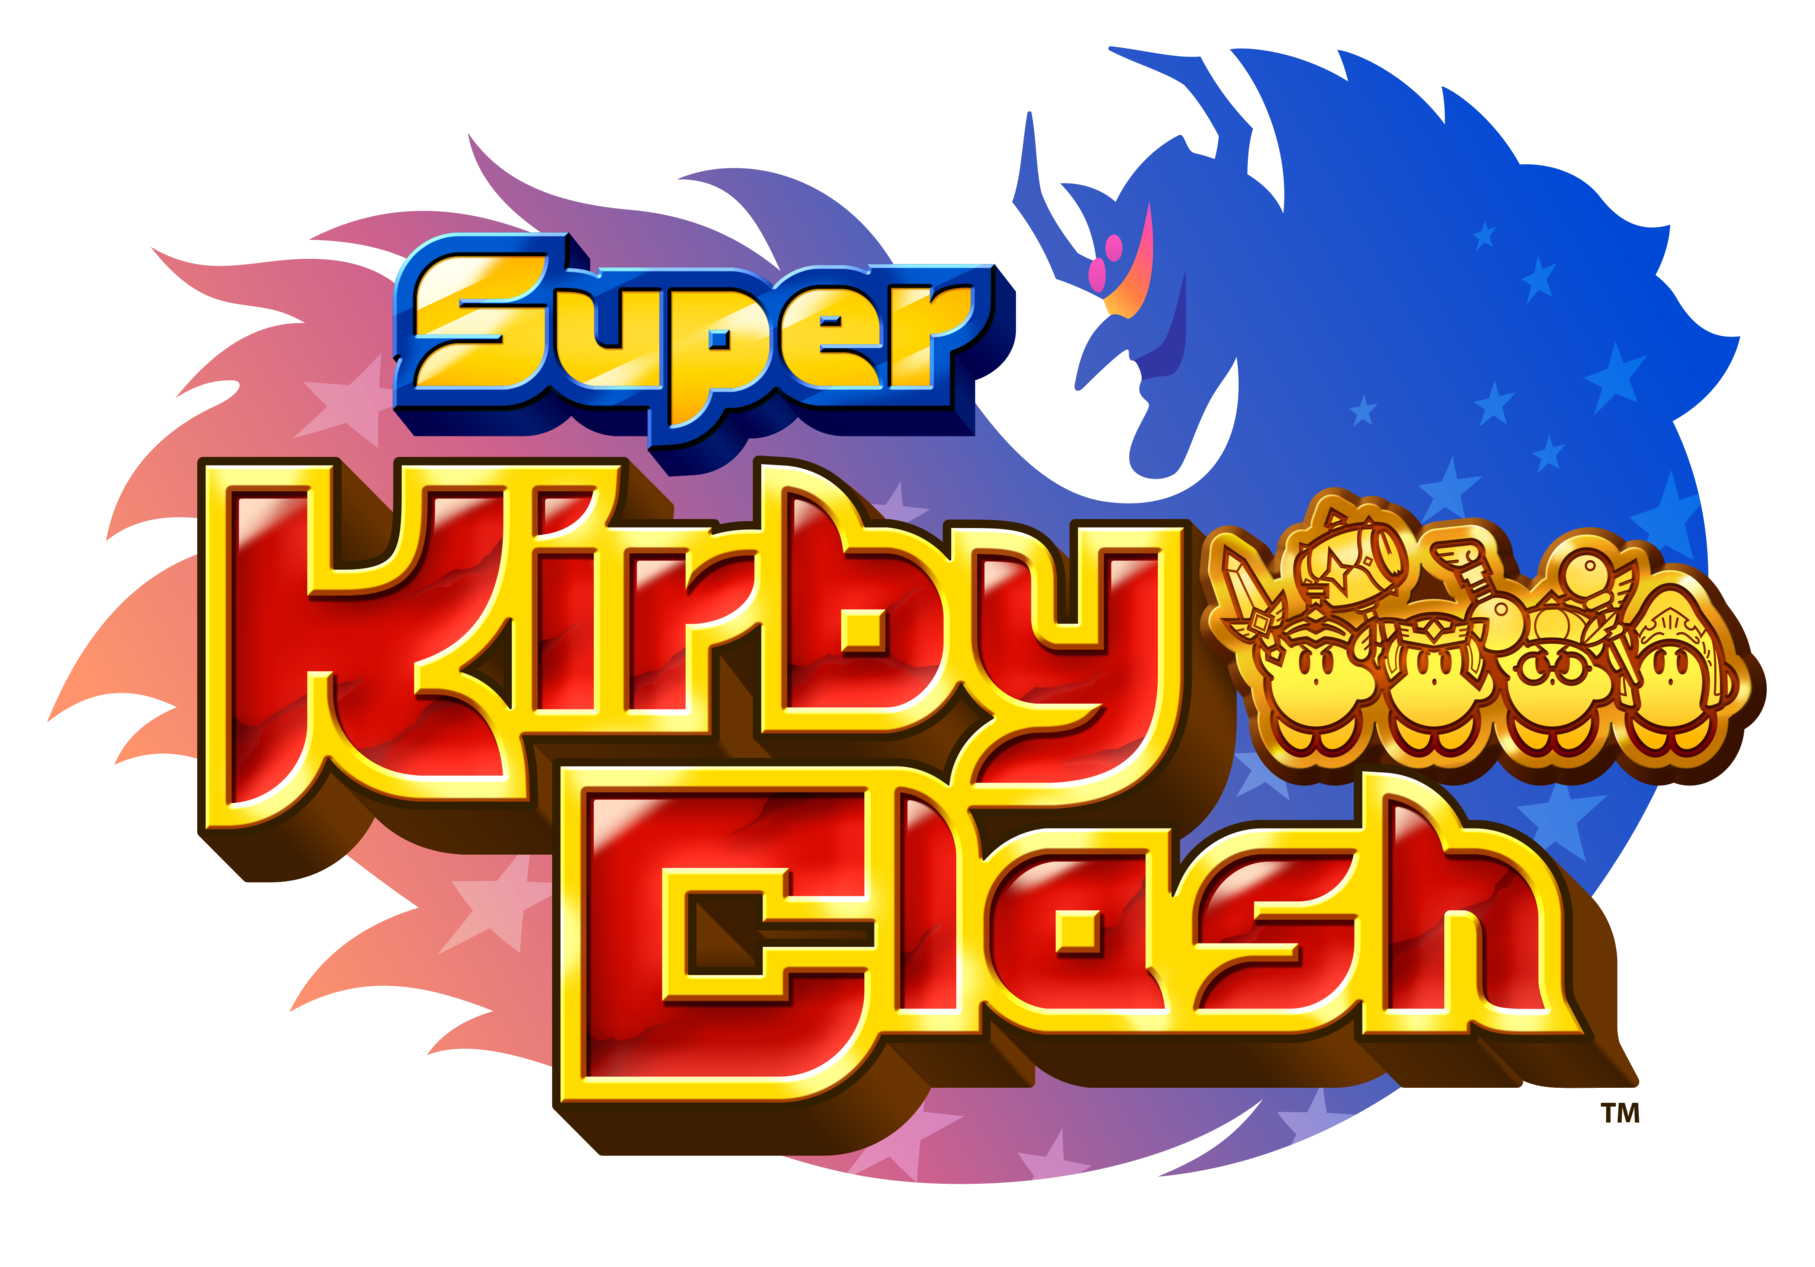 Super Kirby Clash Free To Play Game for Nintendo Switch - Play Nintendo